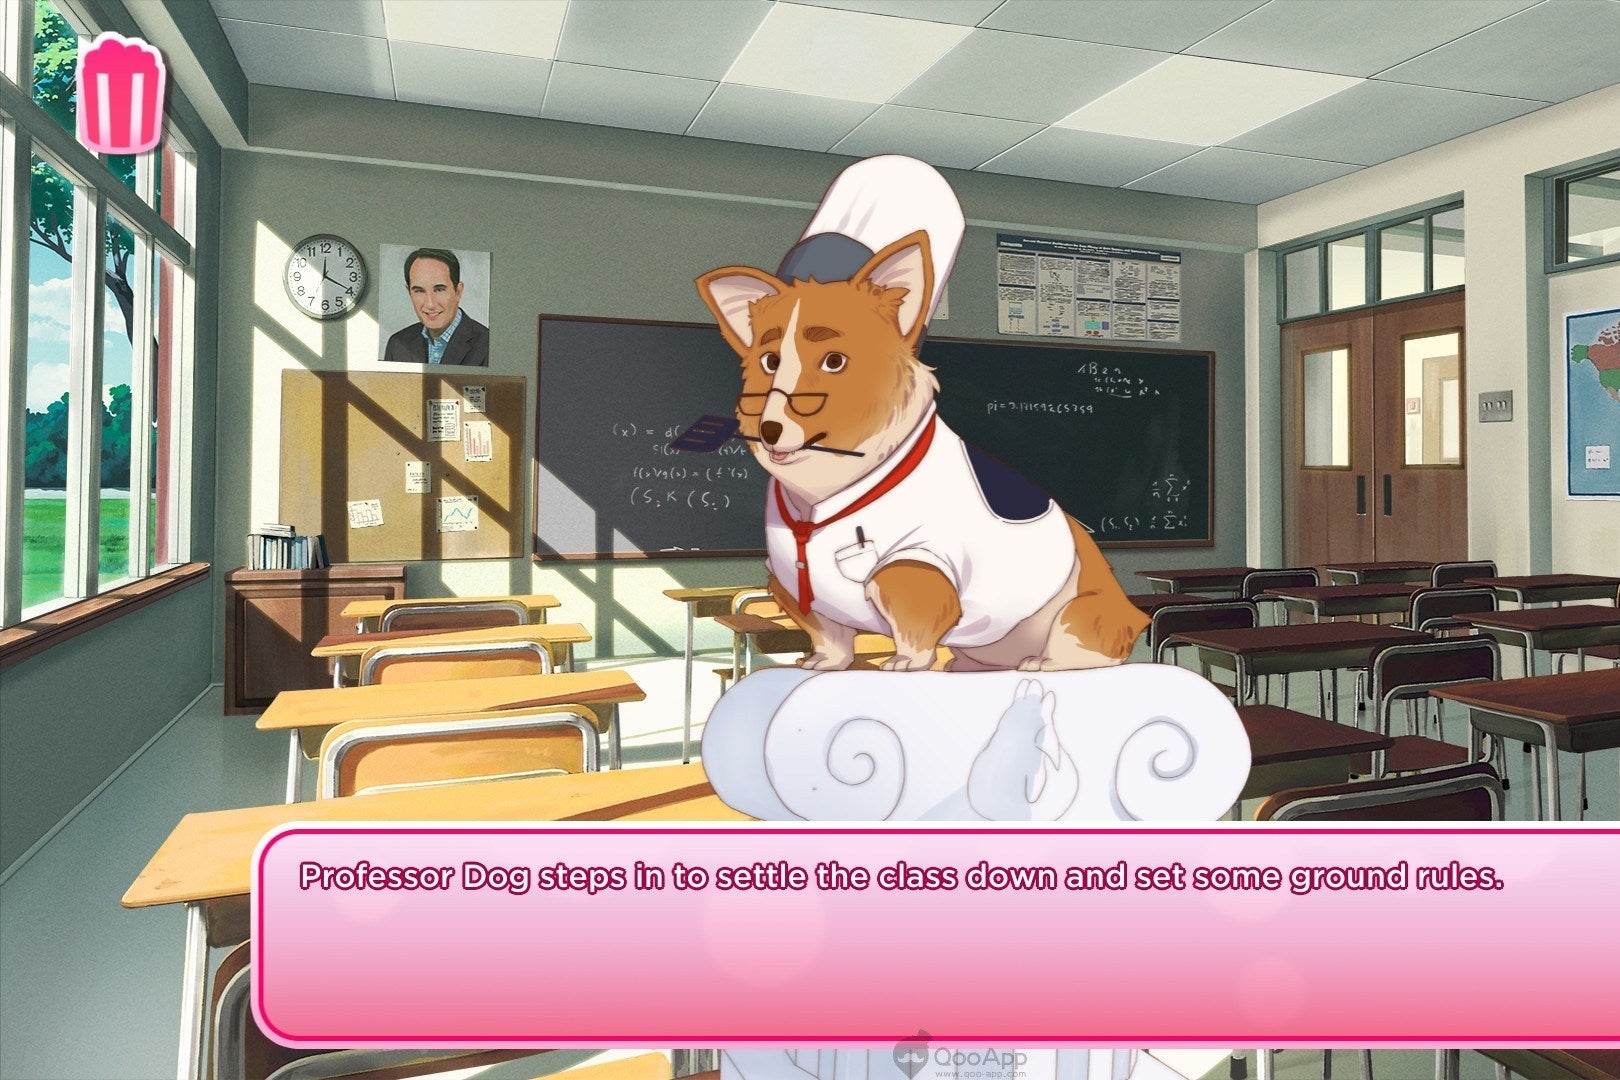 A cartoon dog, dressed as a chef, holds a spatula in his mouth while standing on a pedestal in a classroom. The caption reads: "Professor Dog steps in to settle the class down and set some ground rules."